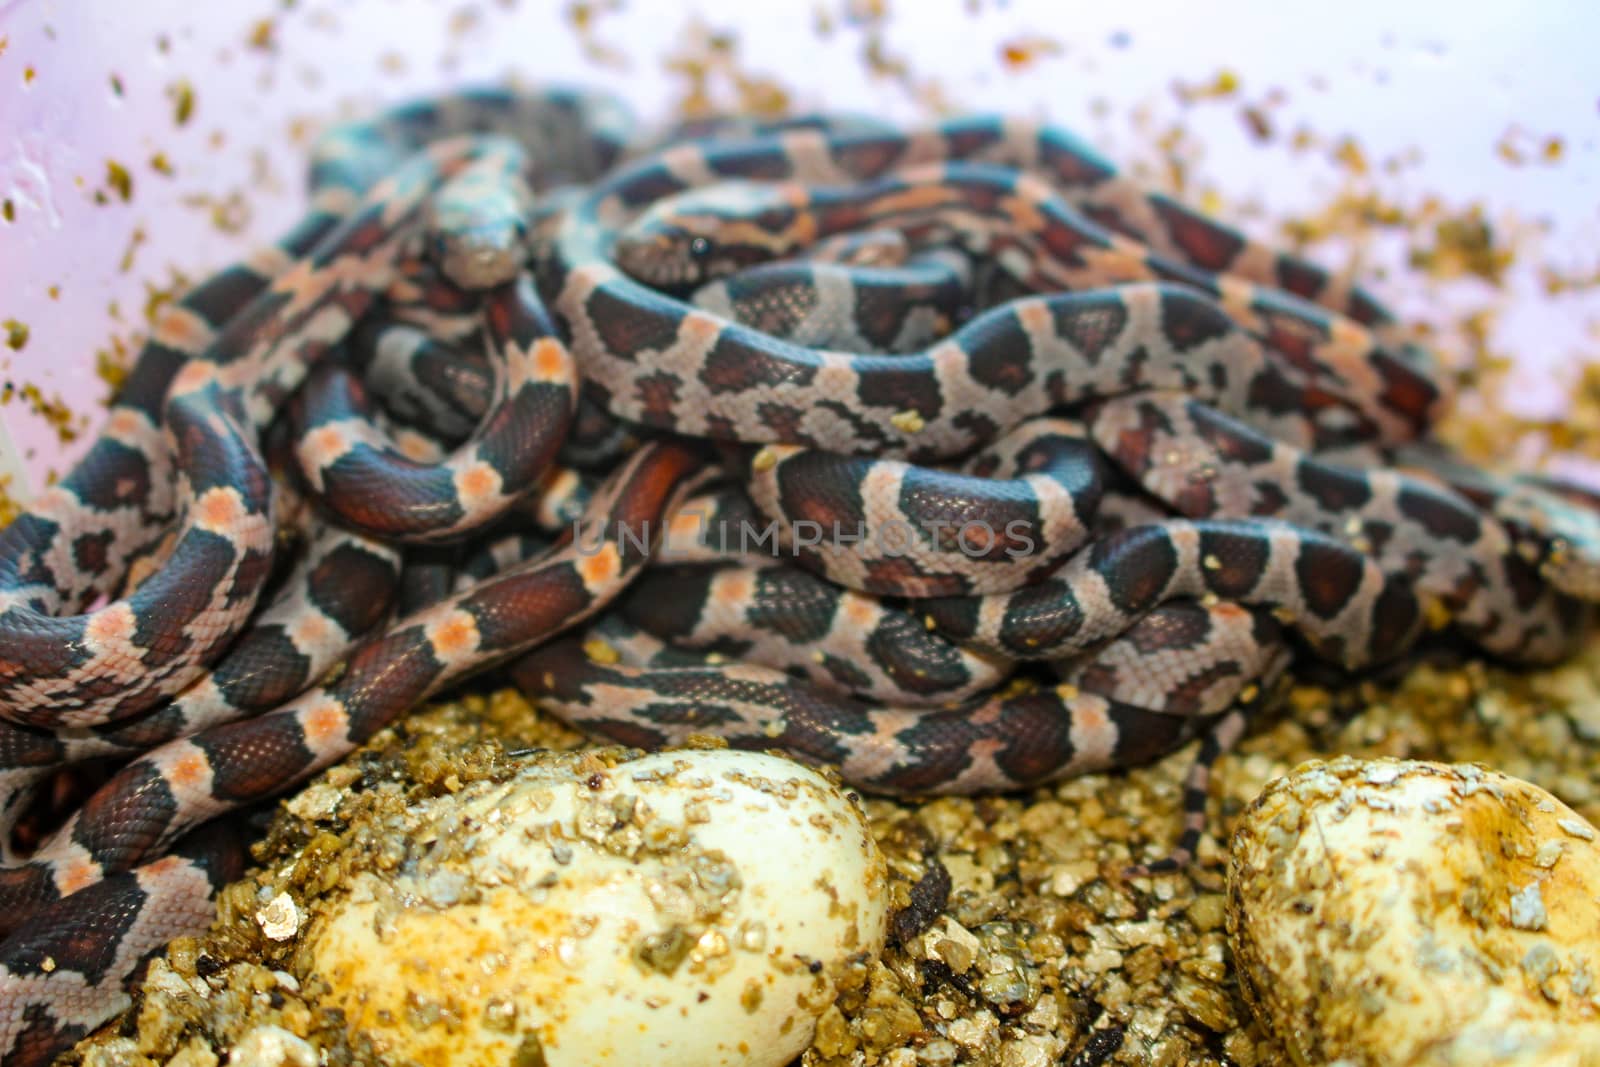 Pile of baby corn snakes that just hatched out of egg by mynewturtle1